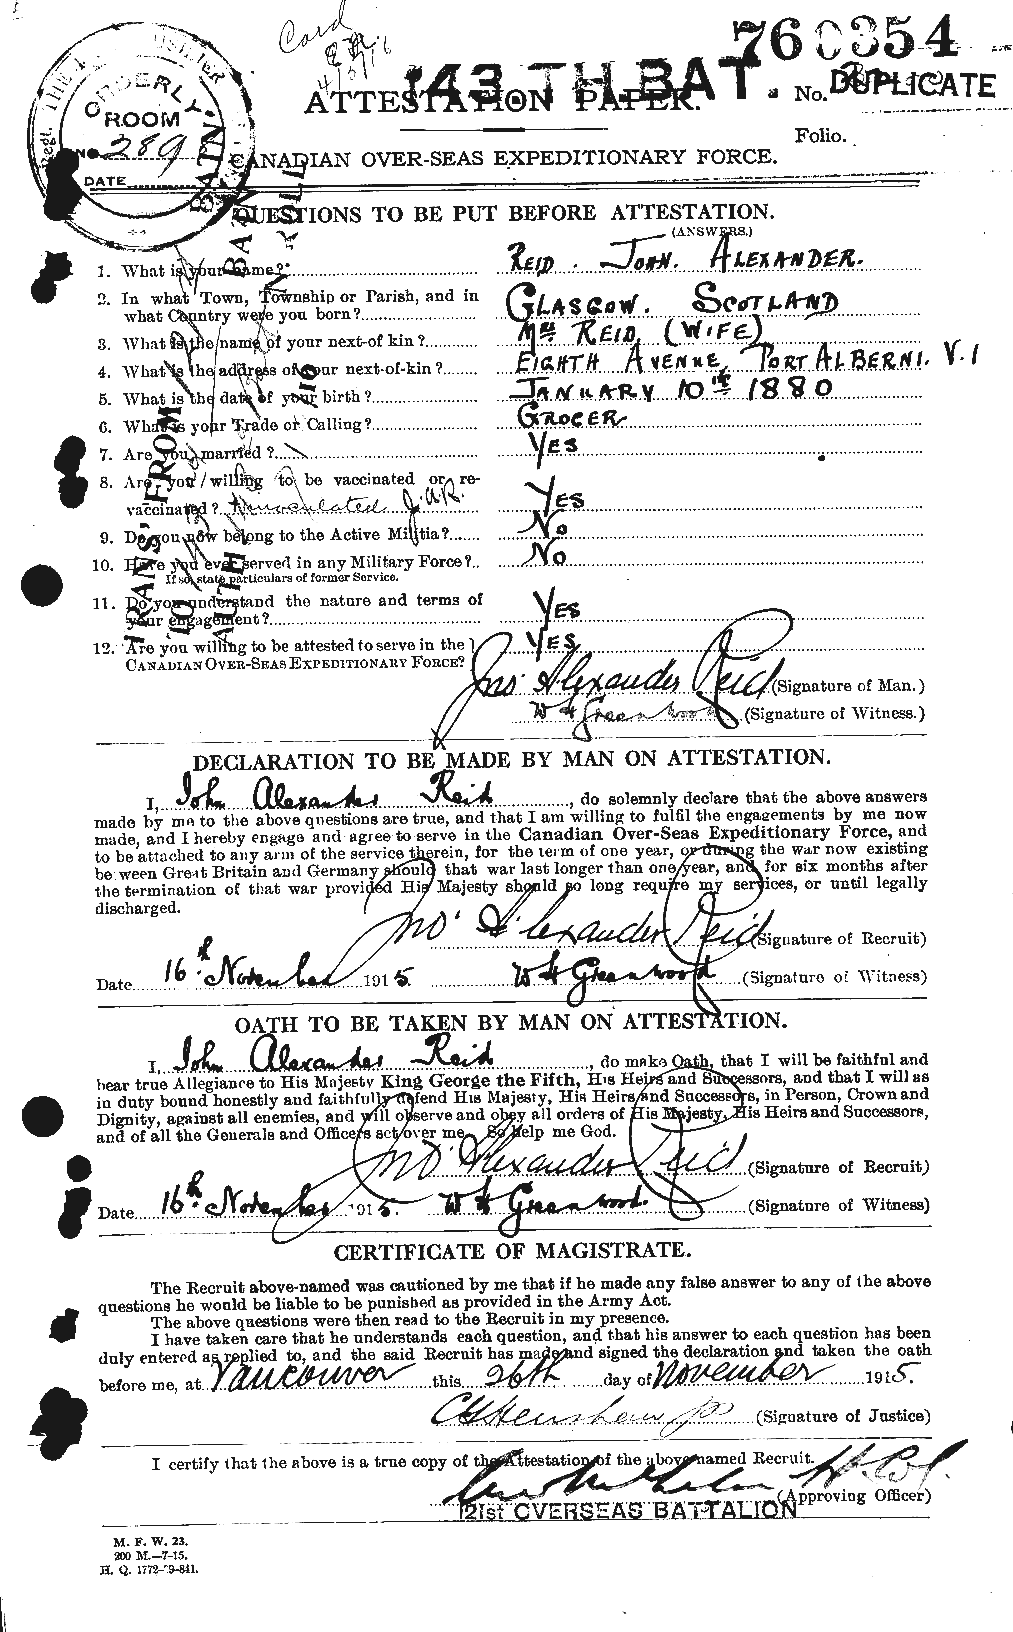 Personnel Records of the First World War - CEF 598819a